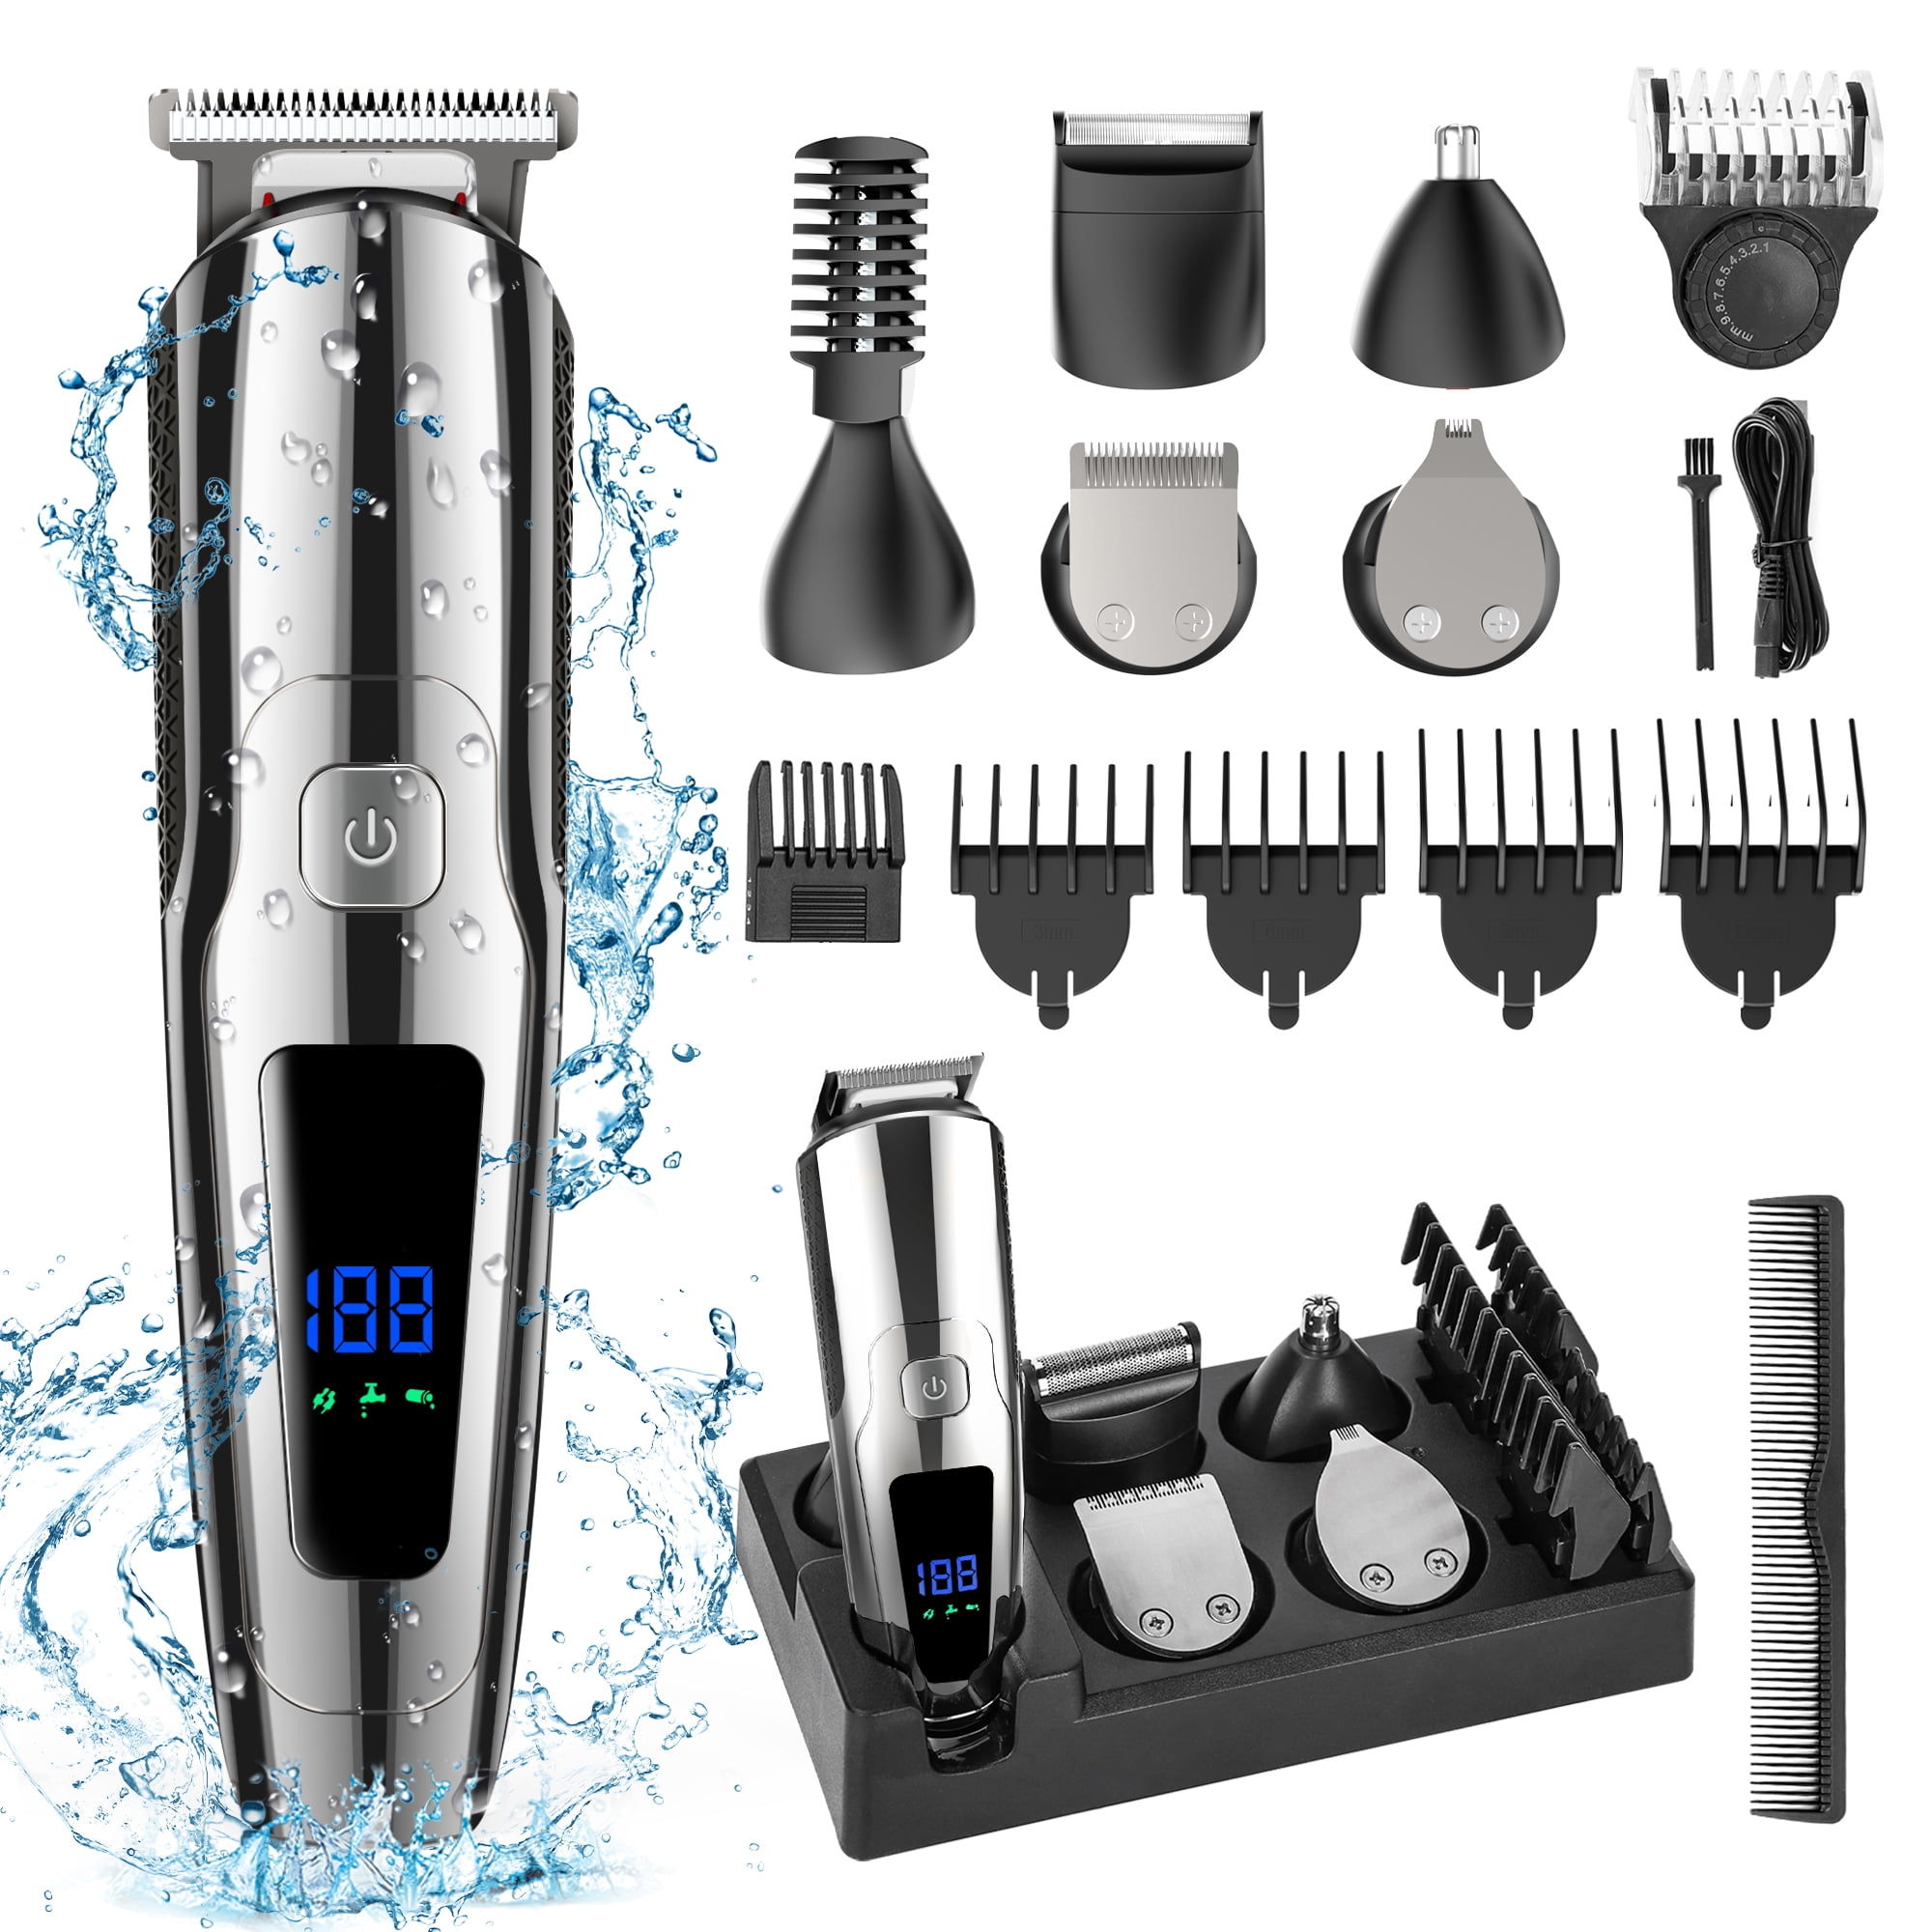 Hair Clipper, 14 in 1 Beard Trimmer for Men, IPX7 Waterproof USB Rechargeable Cordless Haircut Face Nose Ear Hair Kit W/ LED Display for Home Wet/Dry Use - Walmart.com